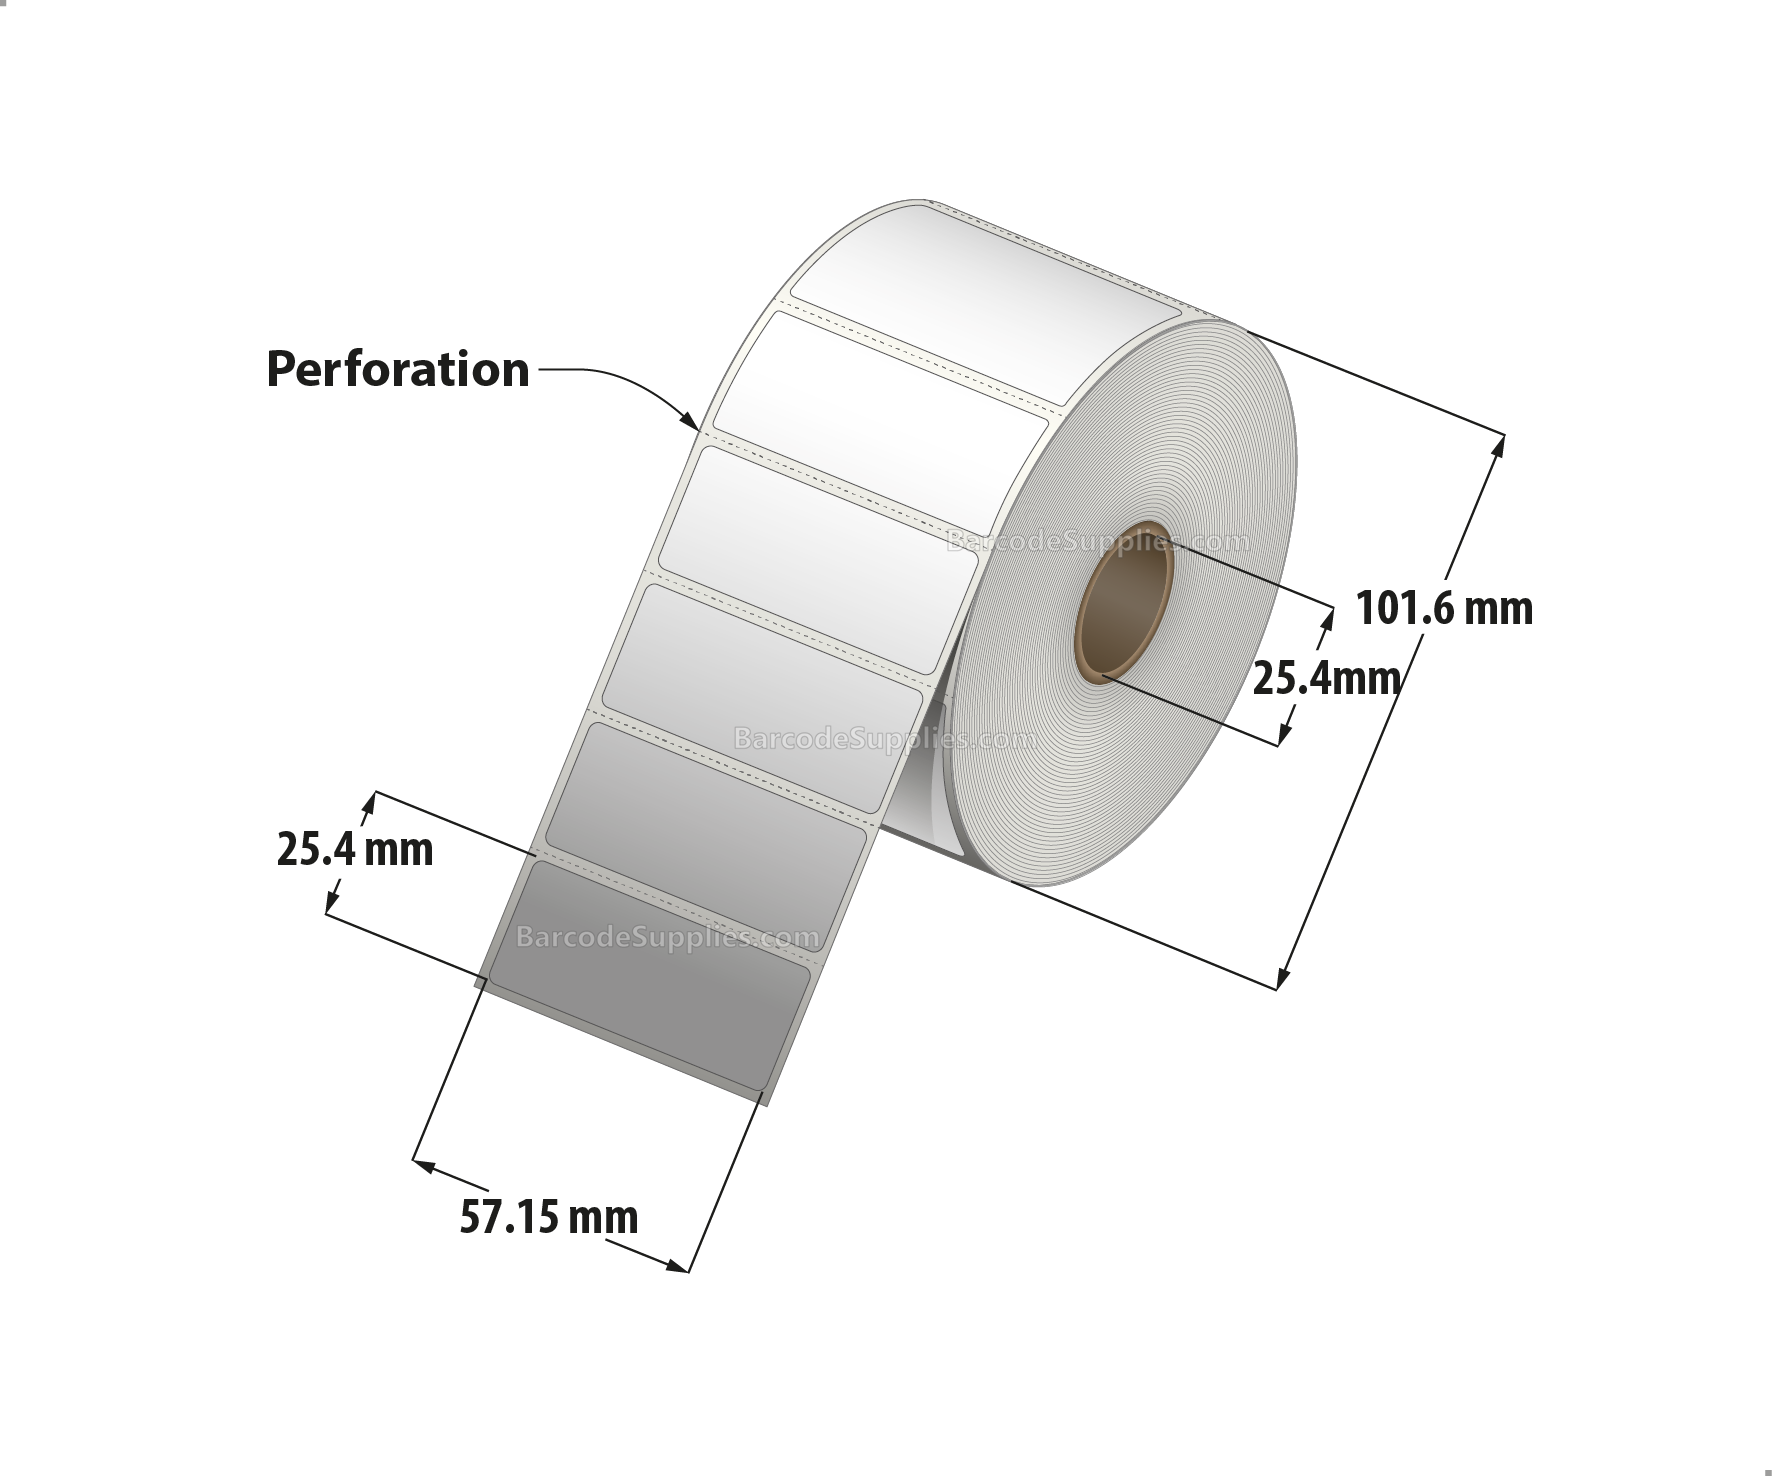 2.25 x 1 Direct Thermal White Labels With Acrylic Adhesive - Perforated - 1375 Labels Per Roll - Carton Of 12 Rolls - 16500 Labels Total - MPN: RD-225-1-1375-1